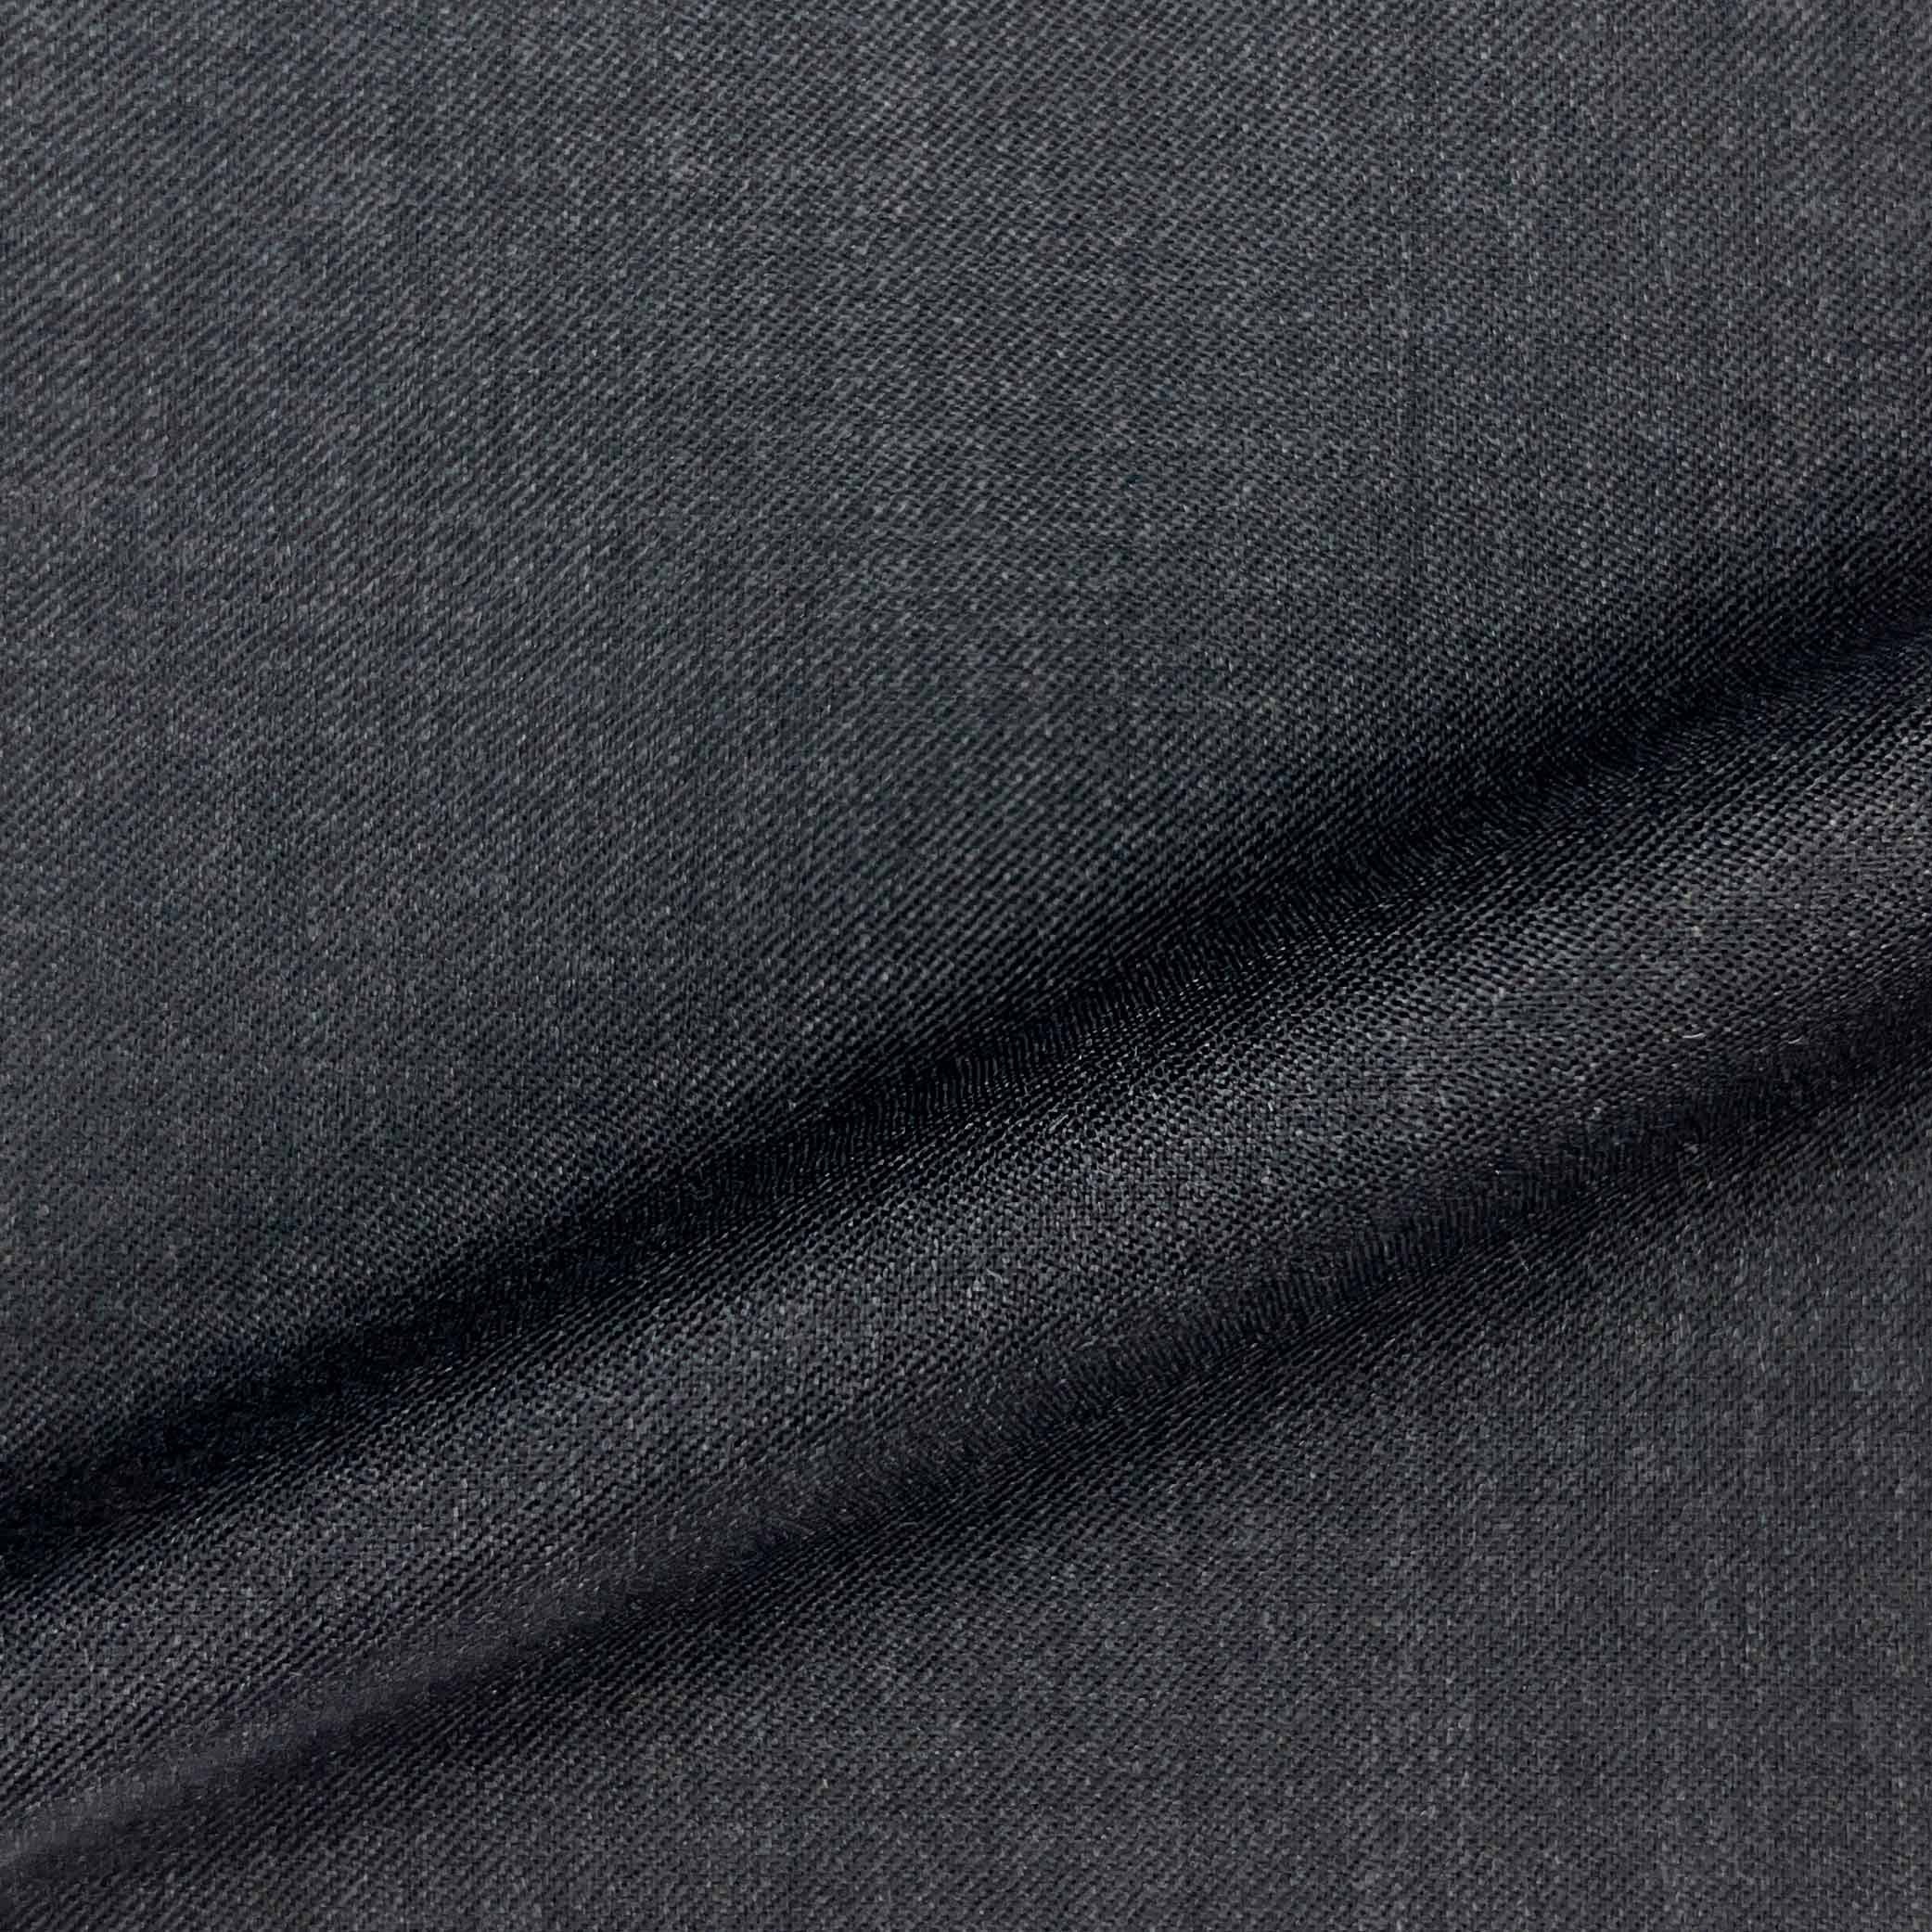 Westwood Hart Online Custom Hand Tailor Suits Sportcoats Trousers Waistcoats Overcoats Made To Measure Formalwear Tuxedo Charcoal Grey Plain Weave With Comfort Stretch